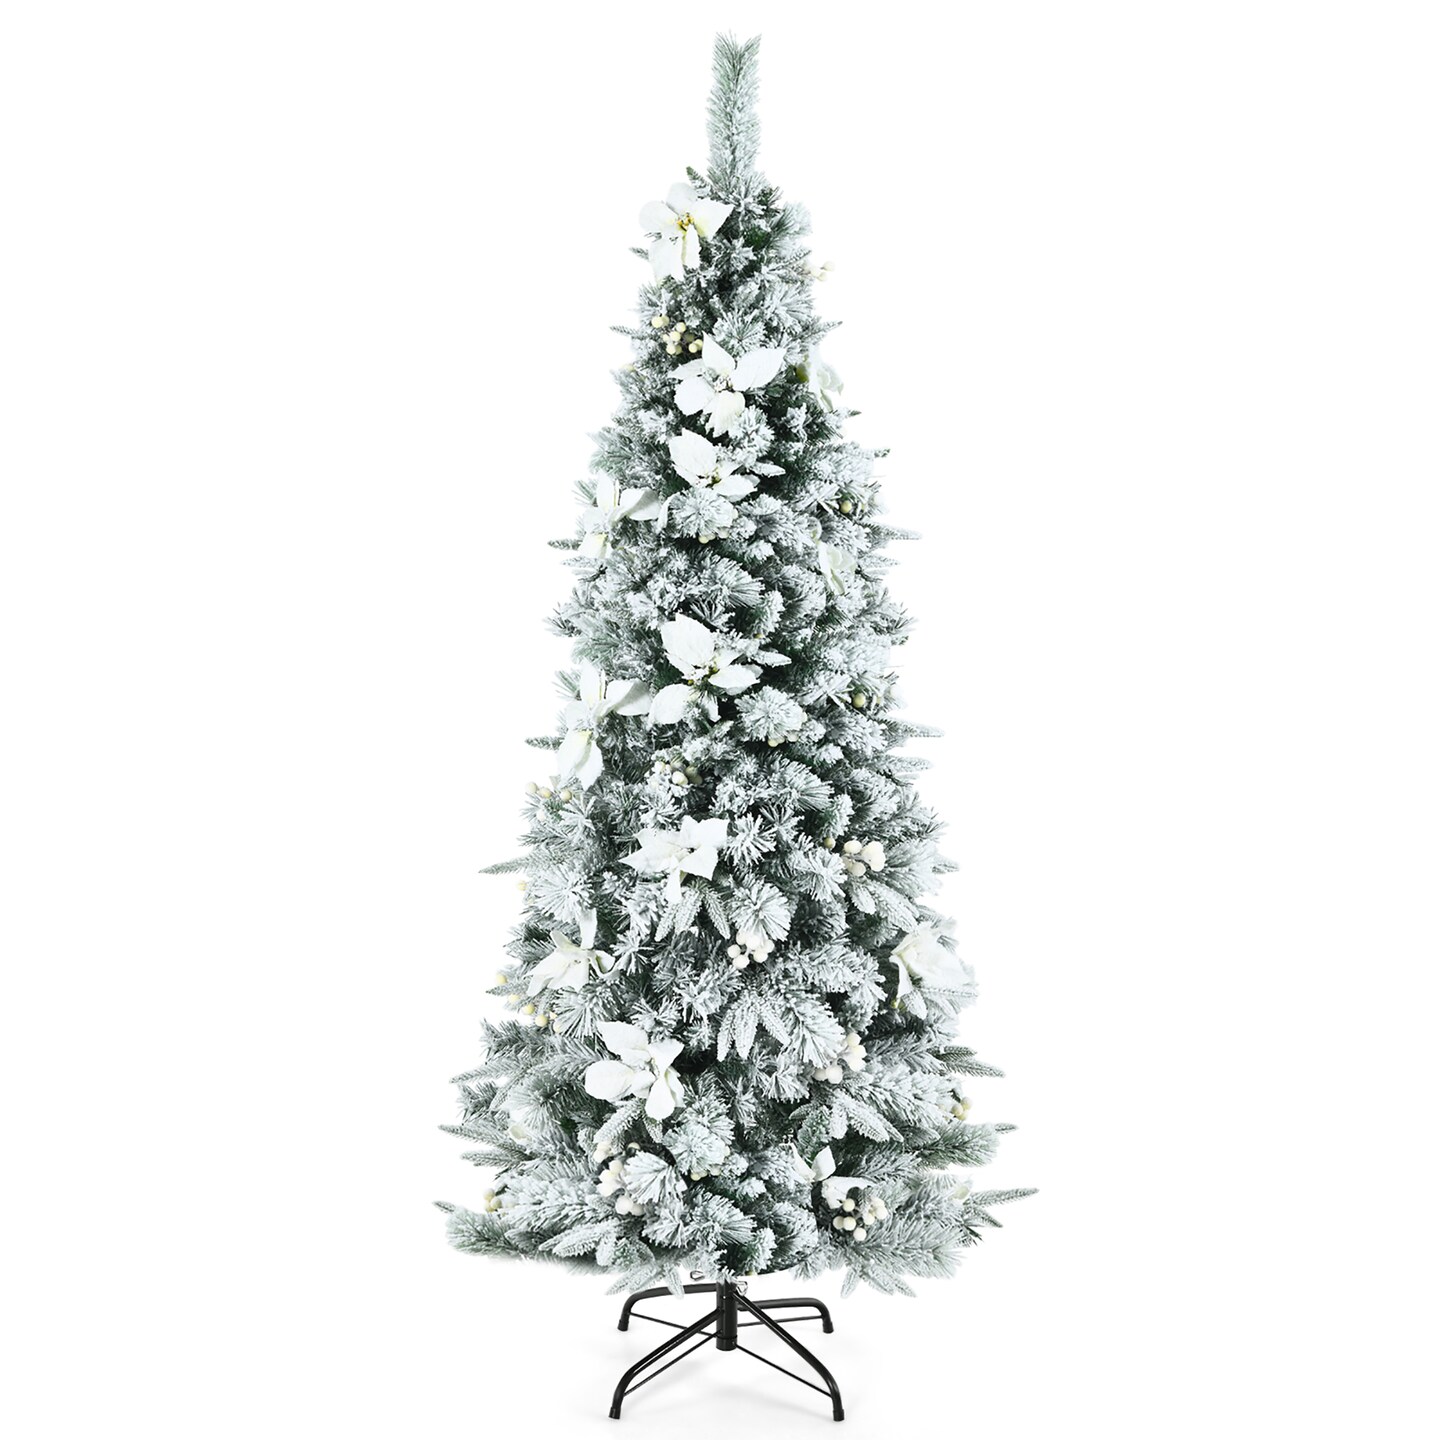 Costway 5ft/6ft/7ft/8ft Snow Flocked Christmas Pencil Tree w/ Berries ...